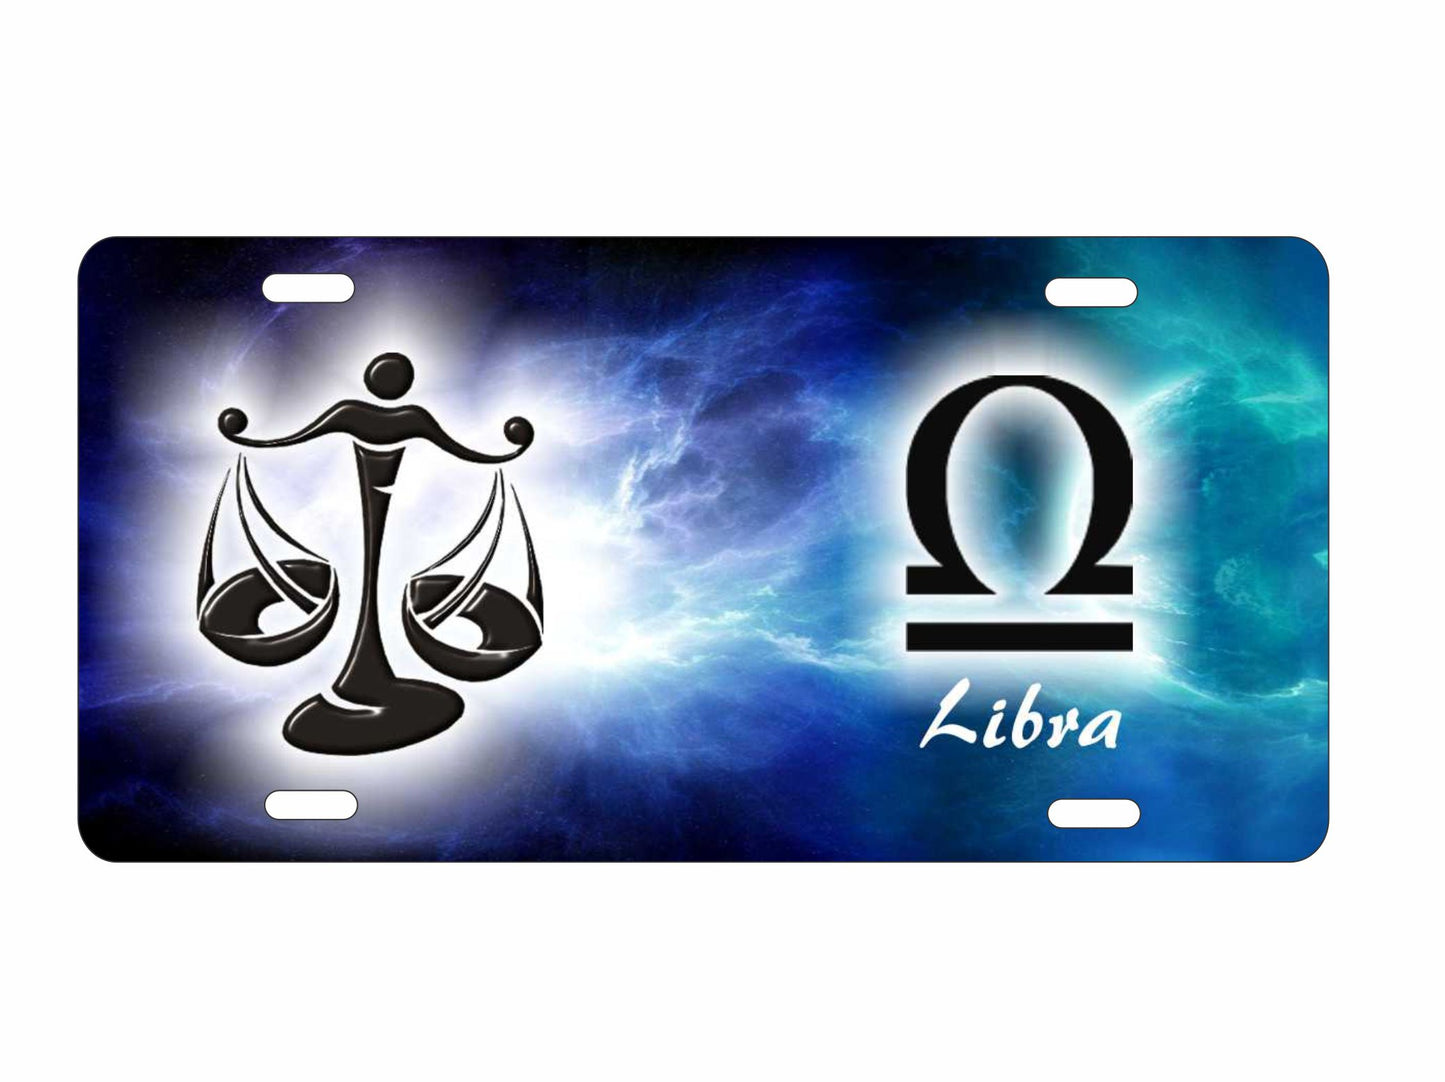 Libra zodiac symbol Astrological sign personalized novelty decorative front license plate